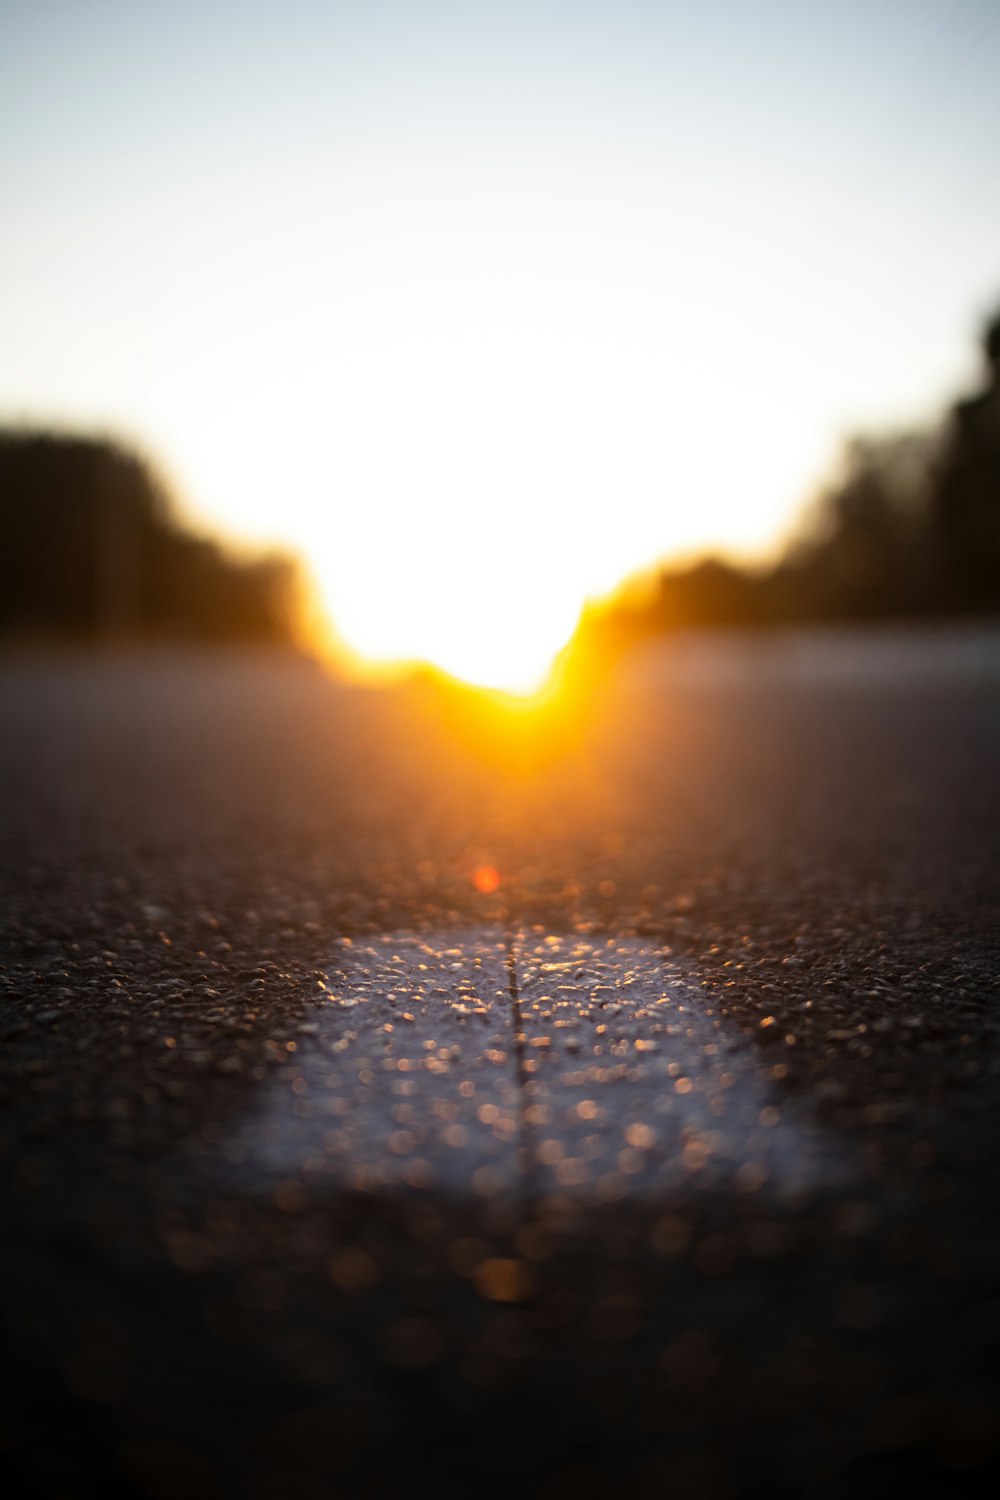 the sun is setting over a street with a line in the middle of the road